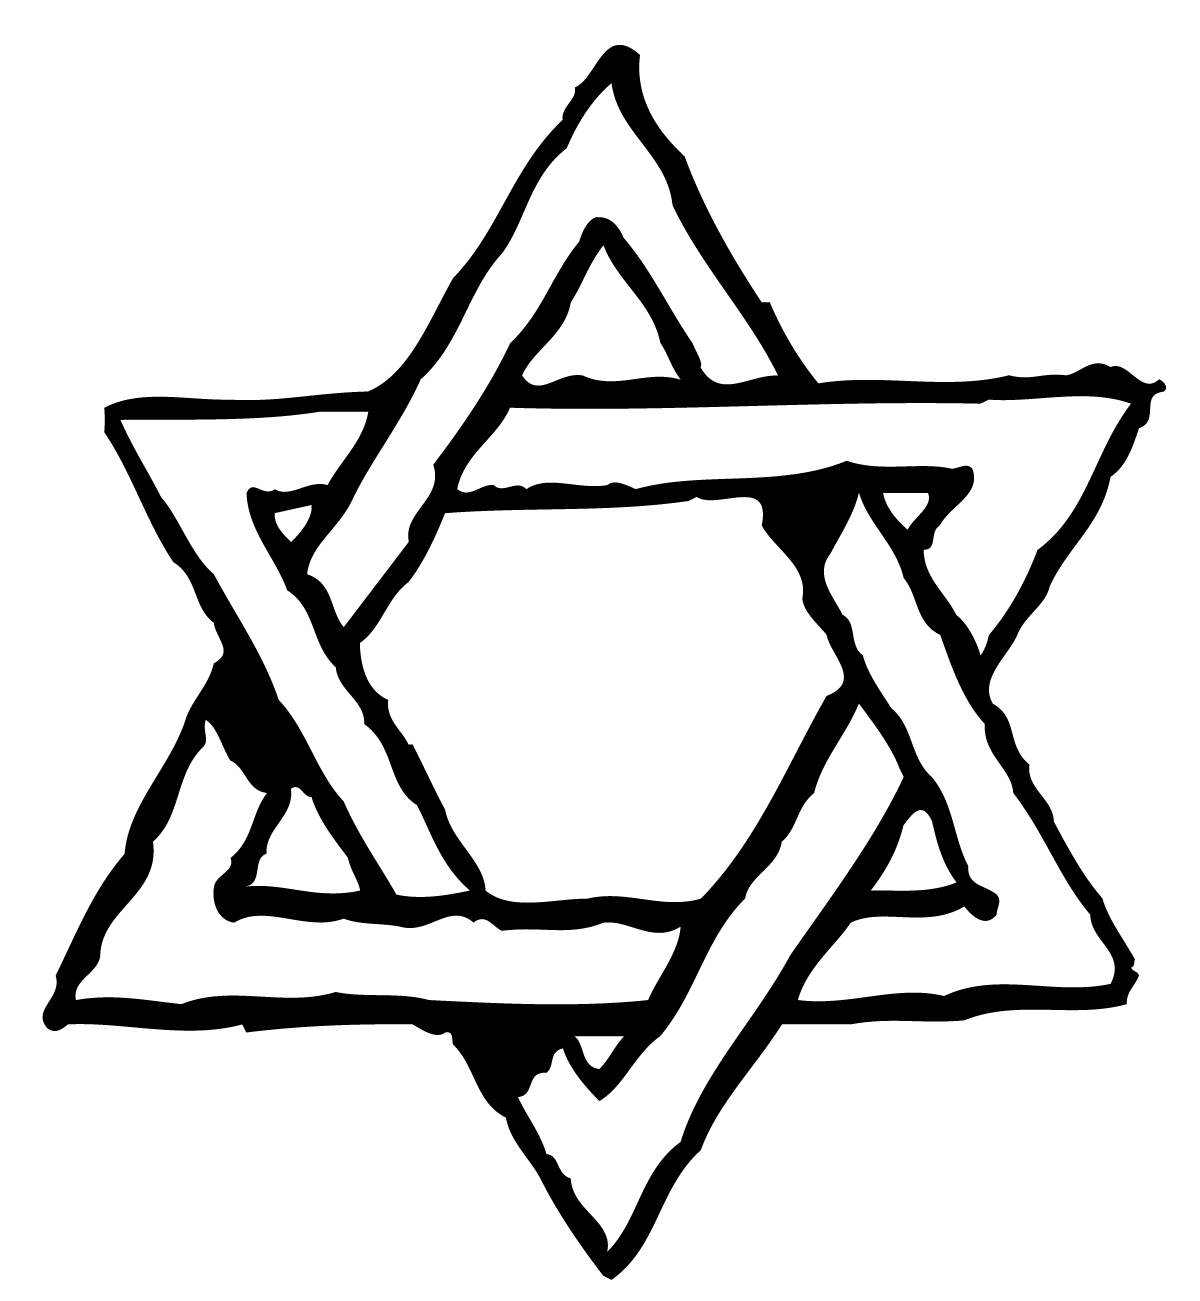 The Star Of David Cool Drawings - ClipArt Best